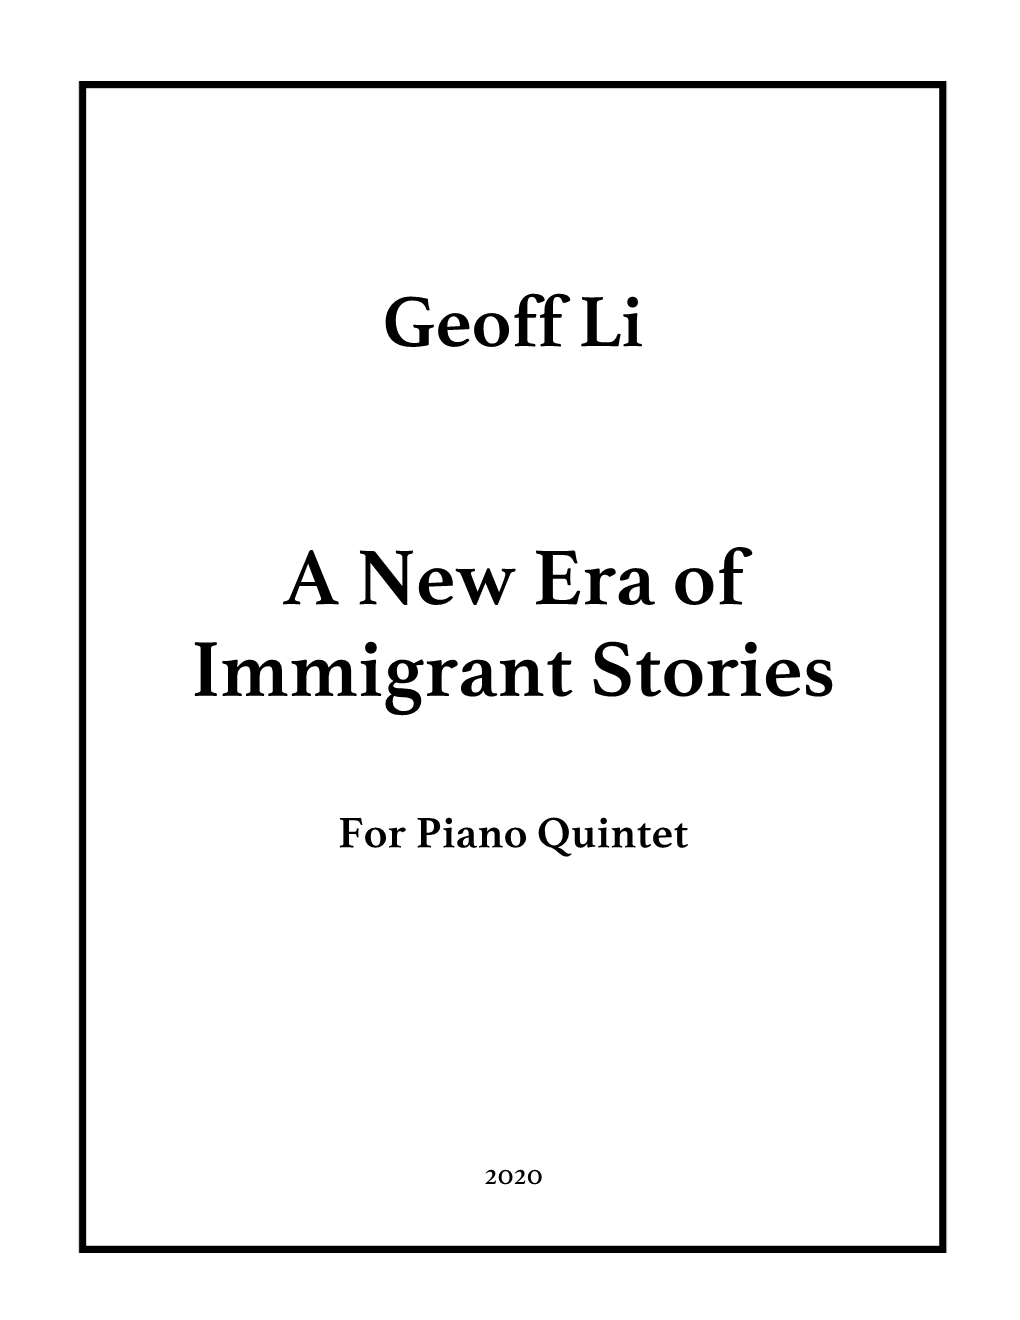 A New Era of Immigrant Stories